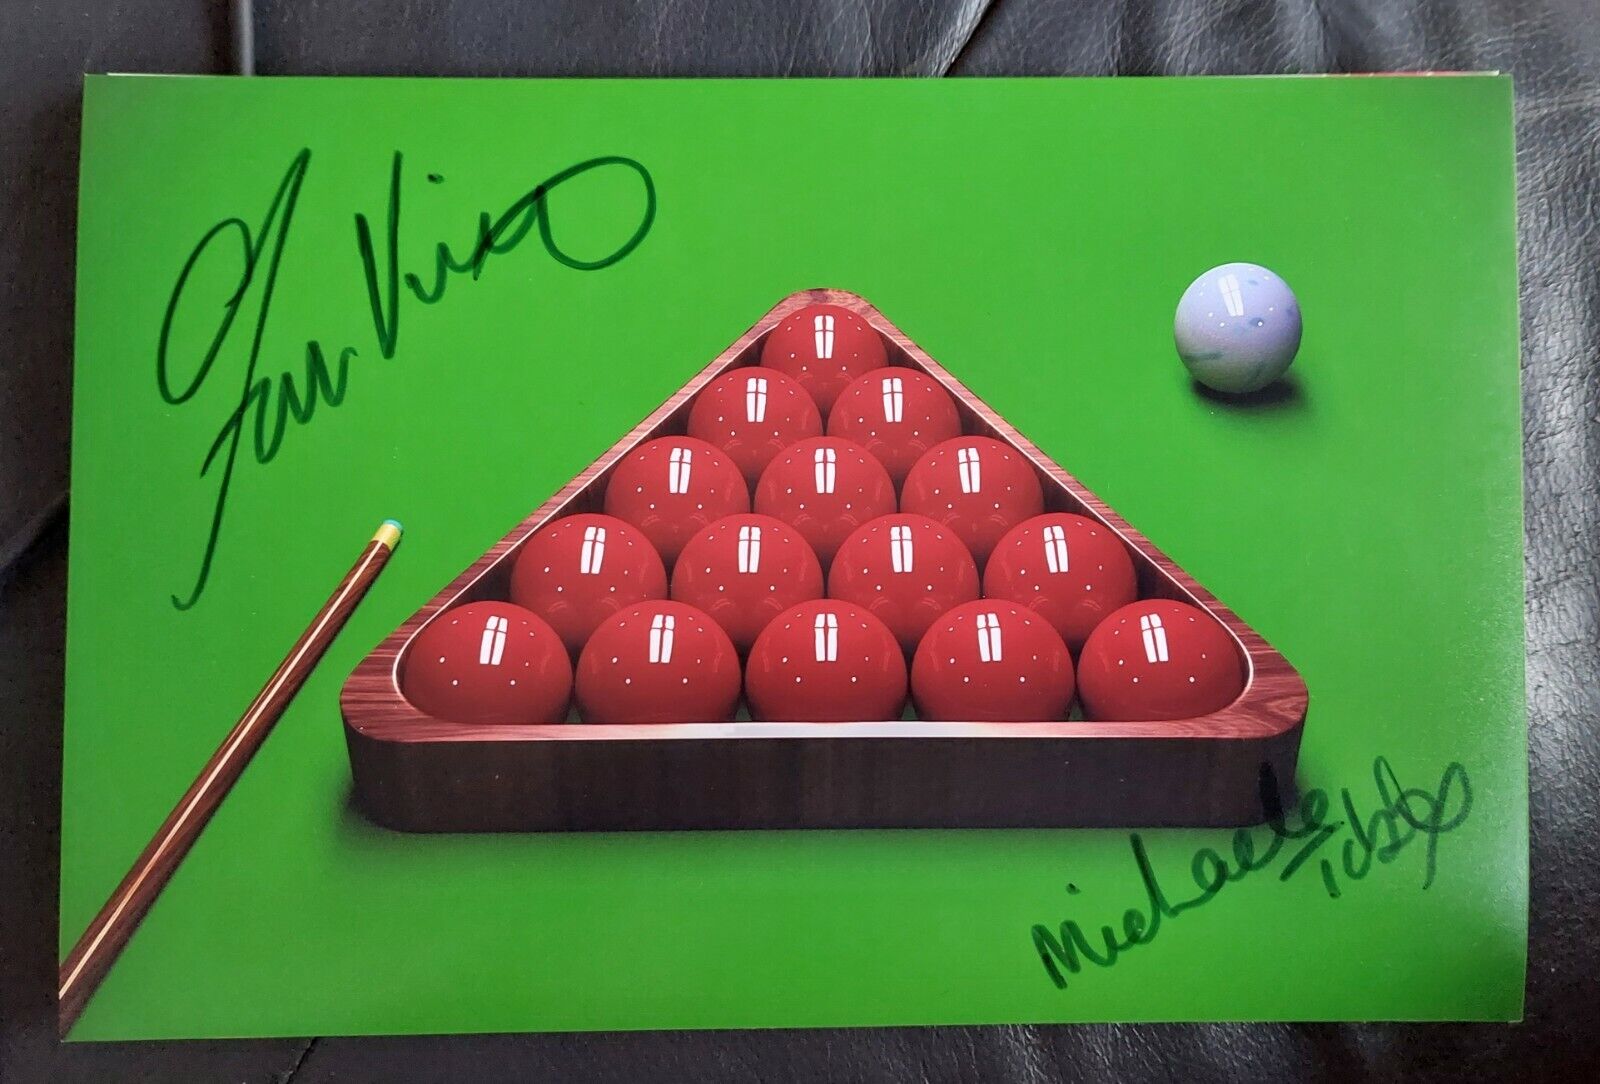 John Virgo and Michaela Tabb Snooker Signed Autographed 6x9 Inch Picture